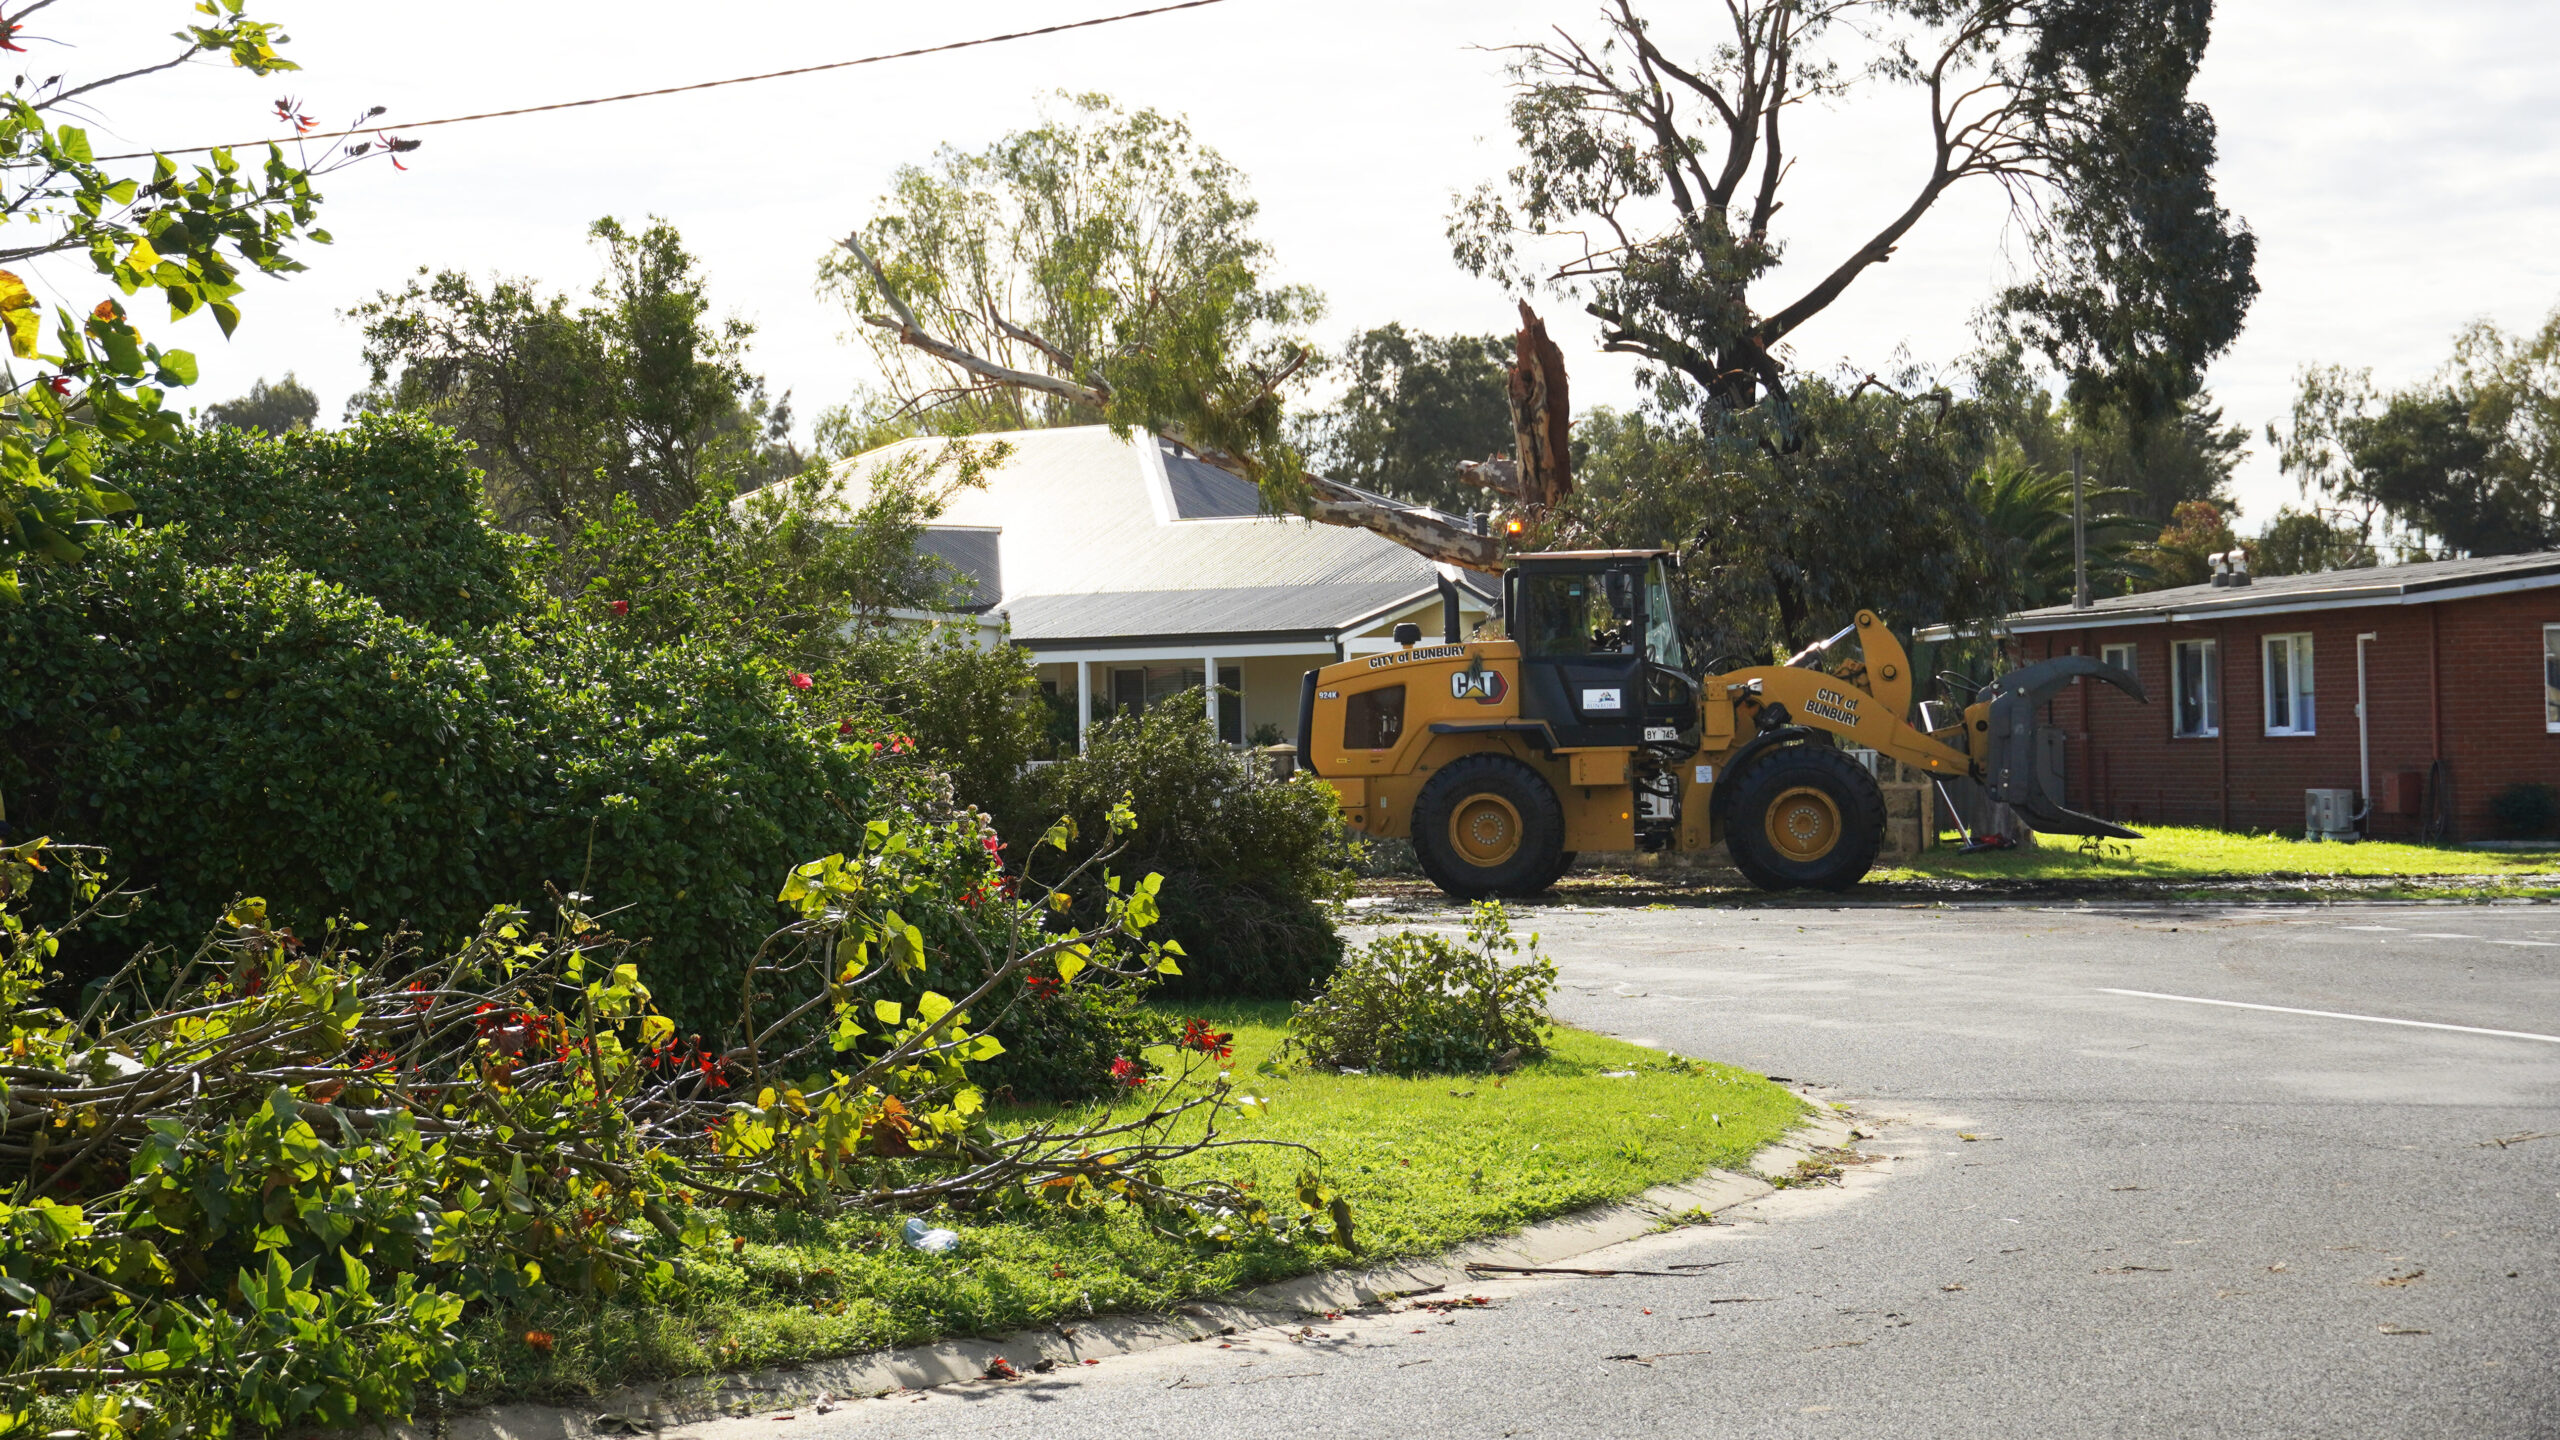 Storm damage in East Bunbury. Fallen trees on a suburban street and a bobcat.